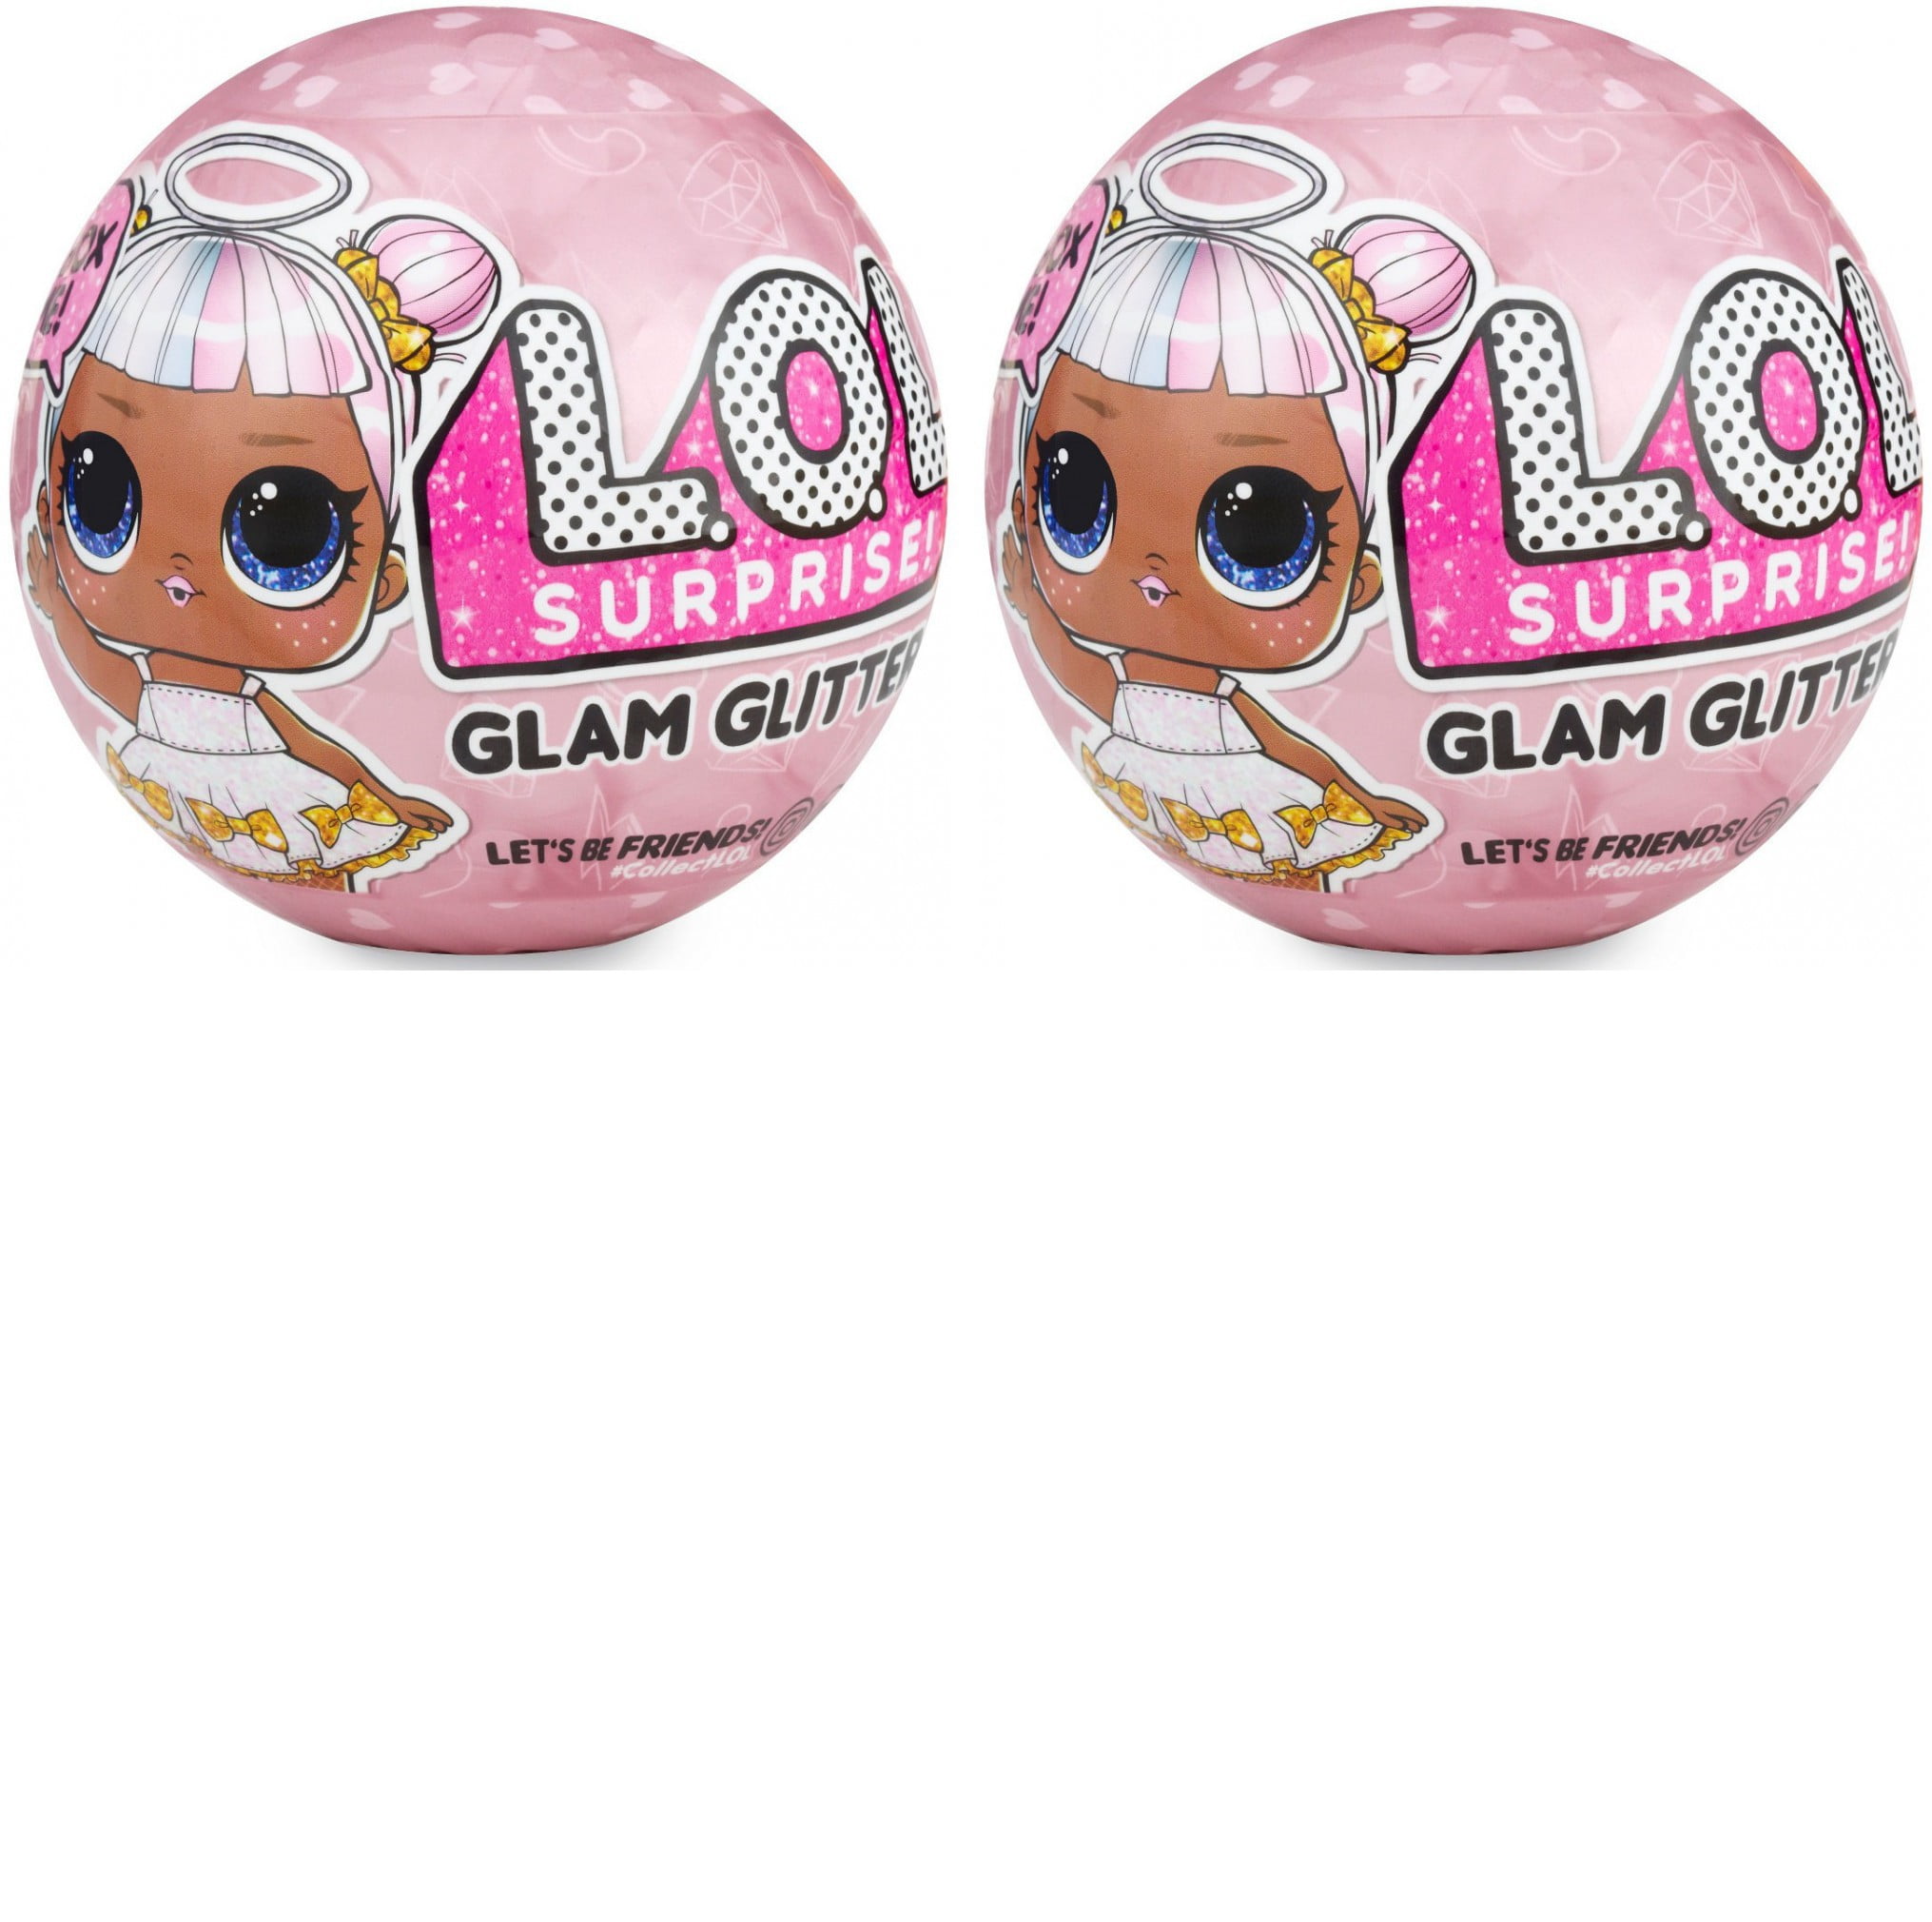 Surprise Glam Glitter Asst Doll Series blind bags In Hand New LOL DOLL L.O.L 